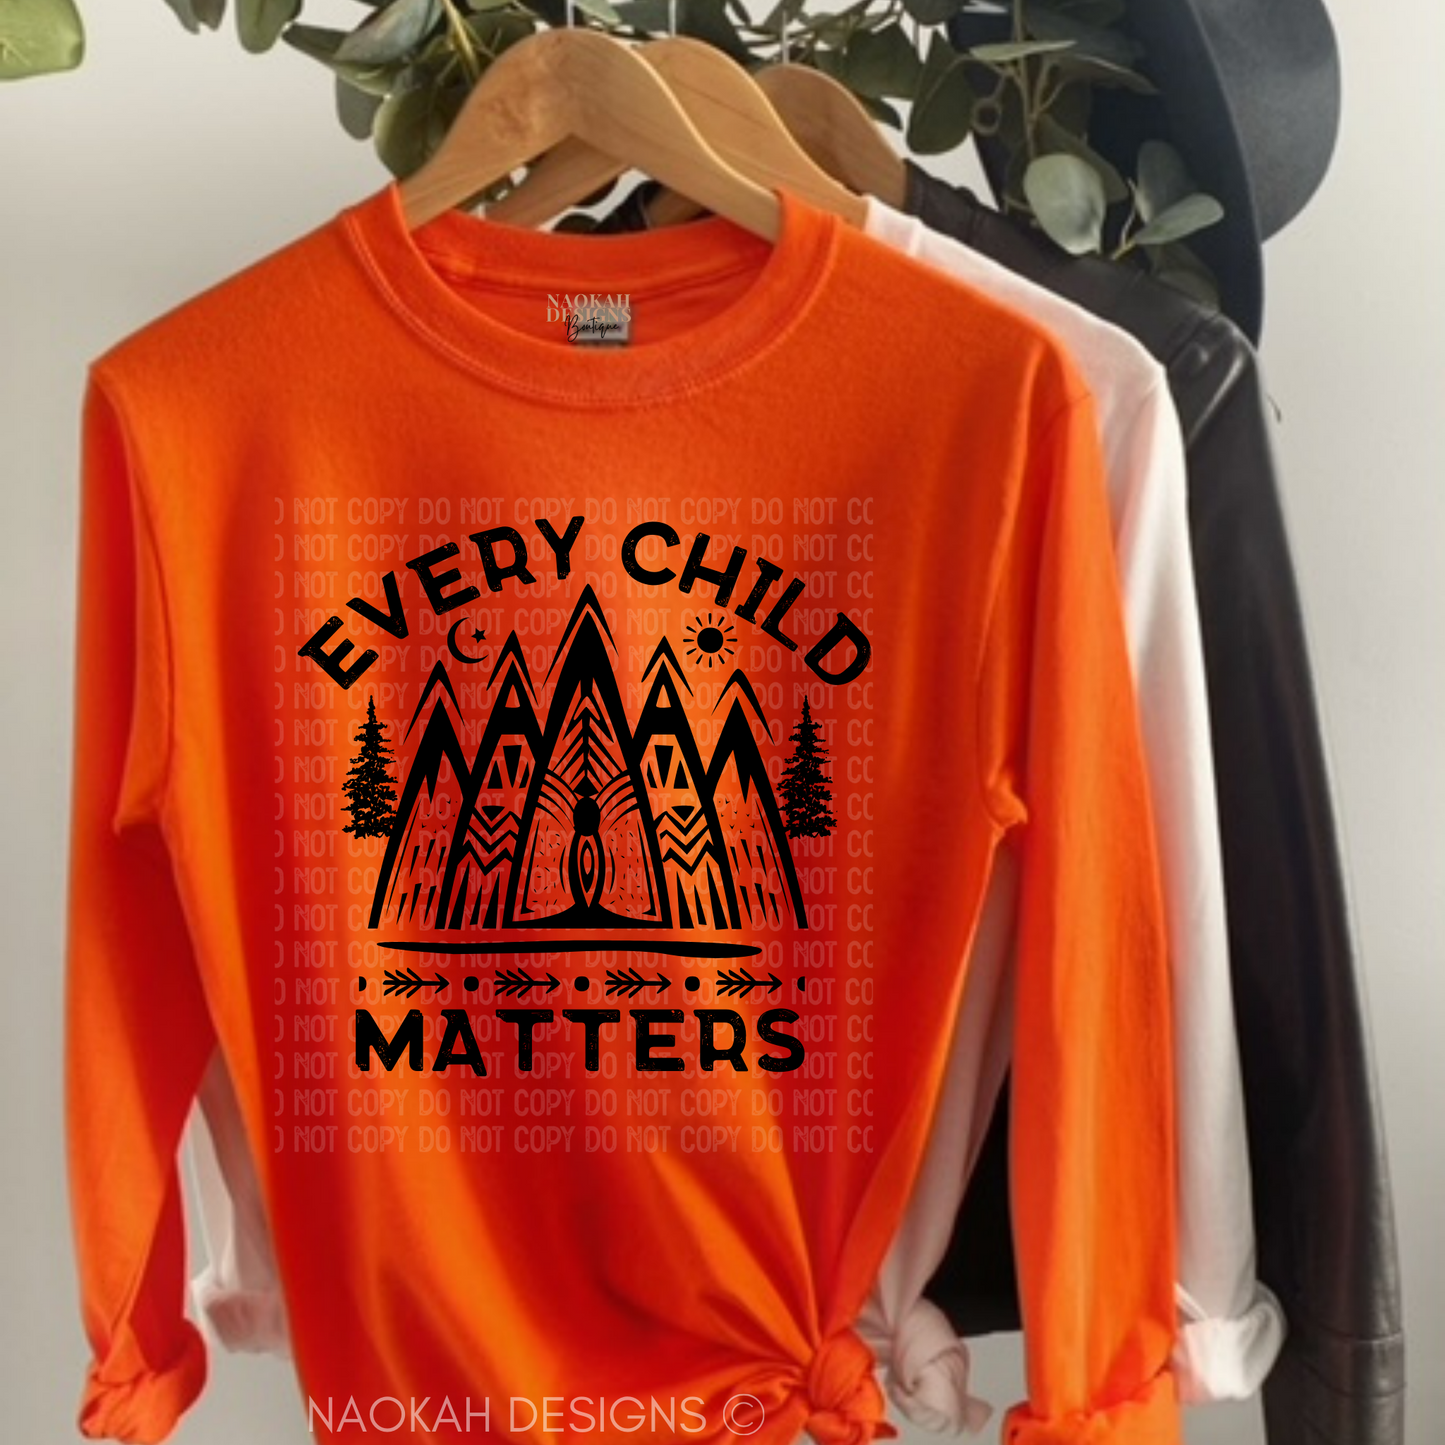 every child matters shirt portion donated, orange shirt day shirt, indigenous owned shop, orange shirt, truth and reconciliation, wanderlust